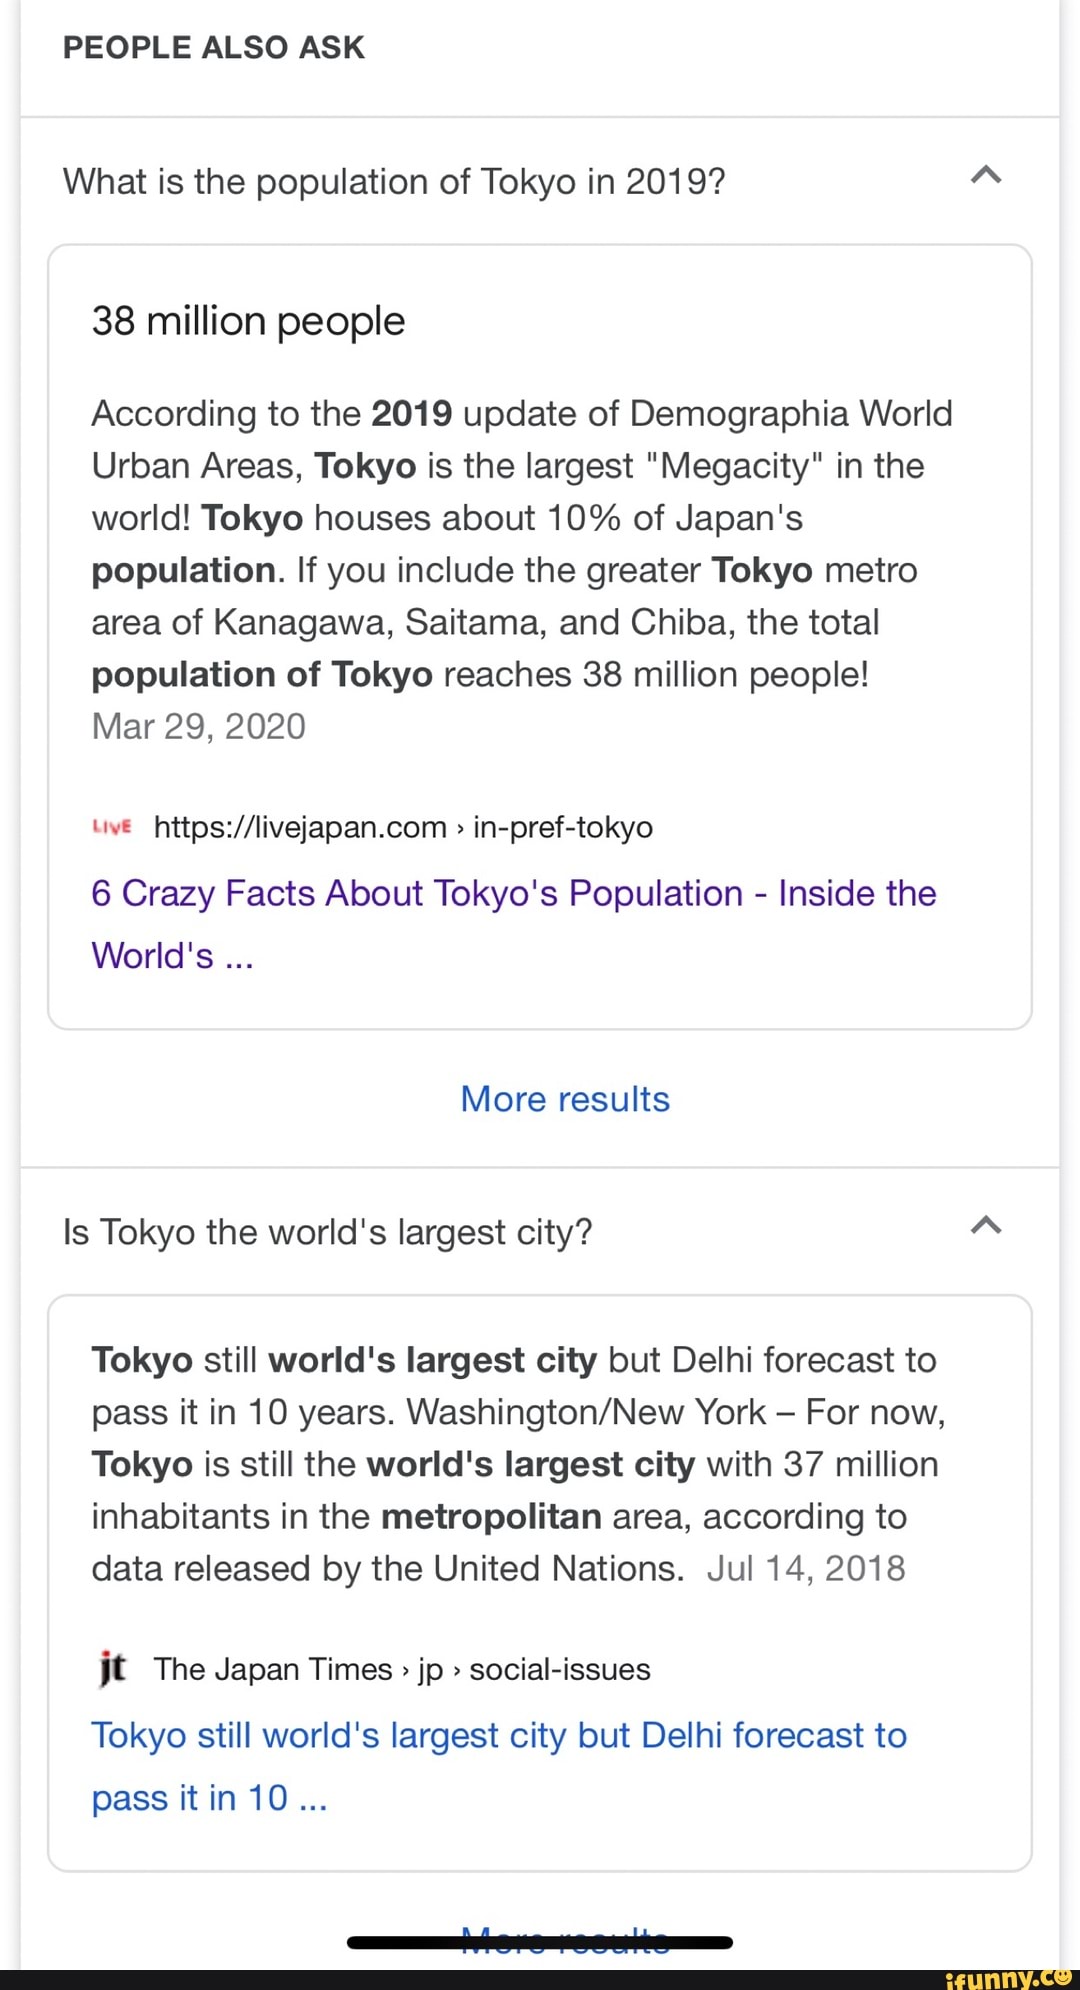 Tokyo still world's largest city but Delhi forecast to pass it in 10 years  - The Japan Times